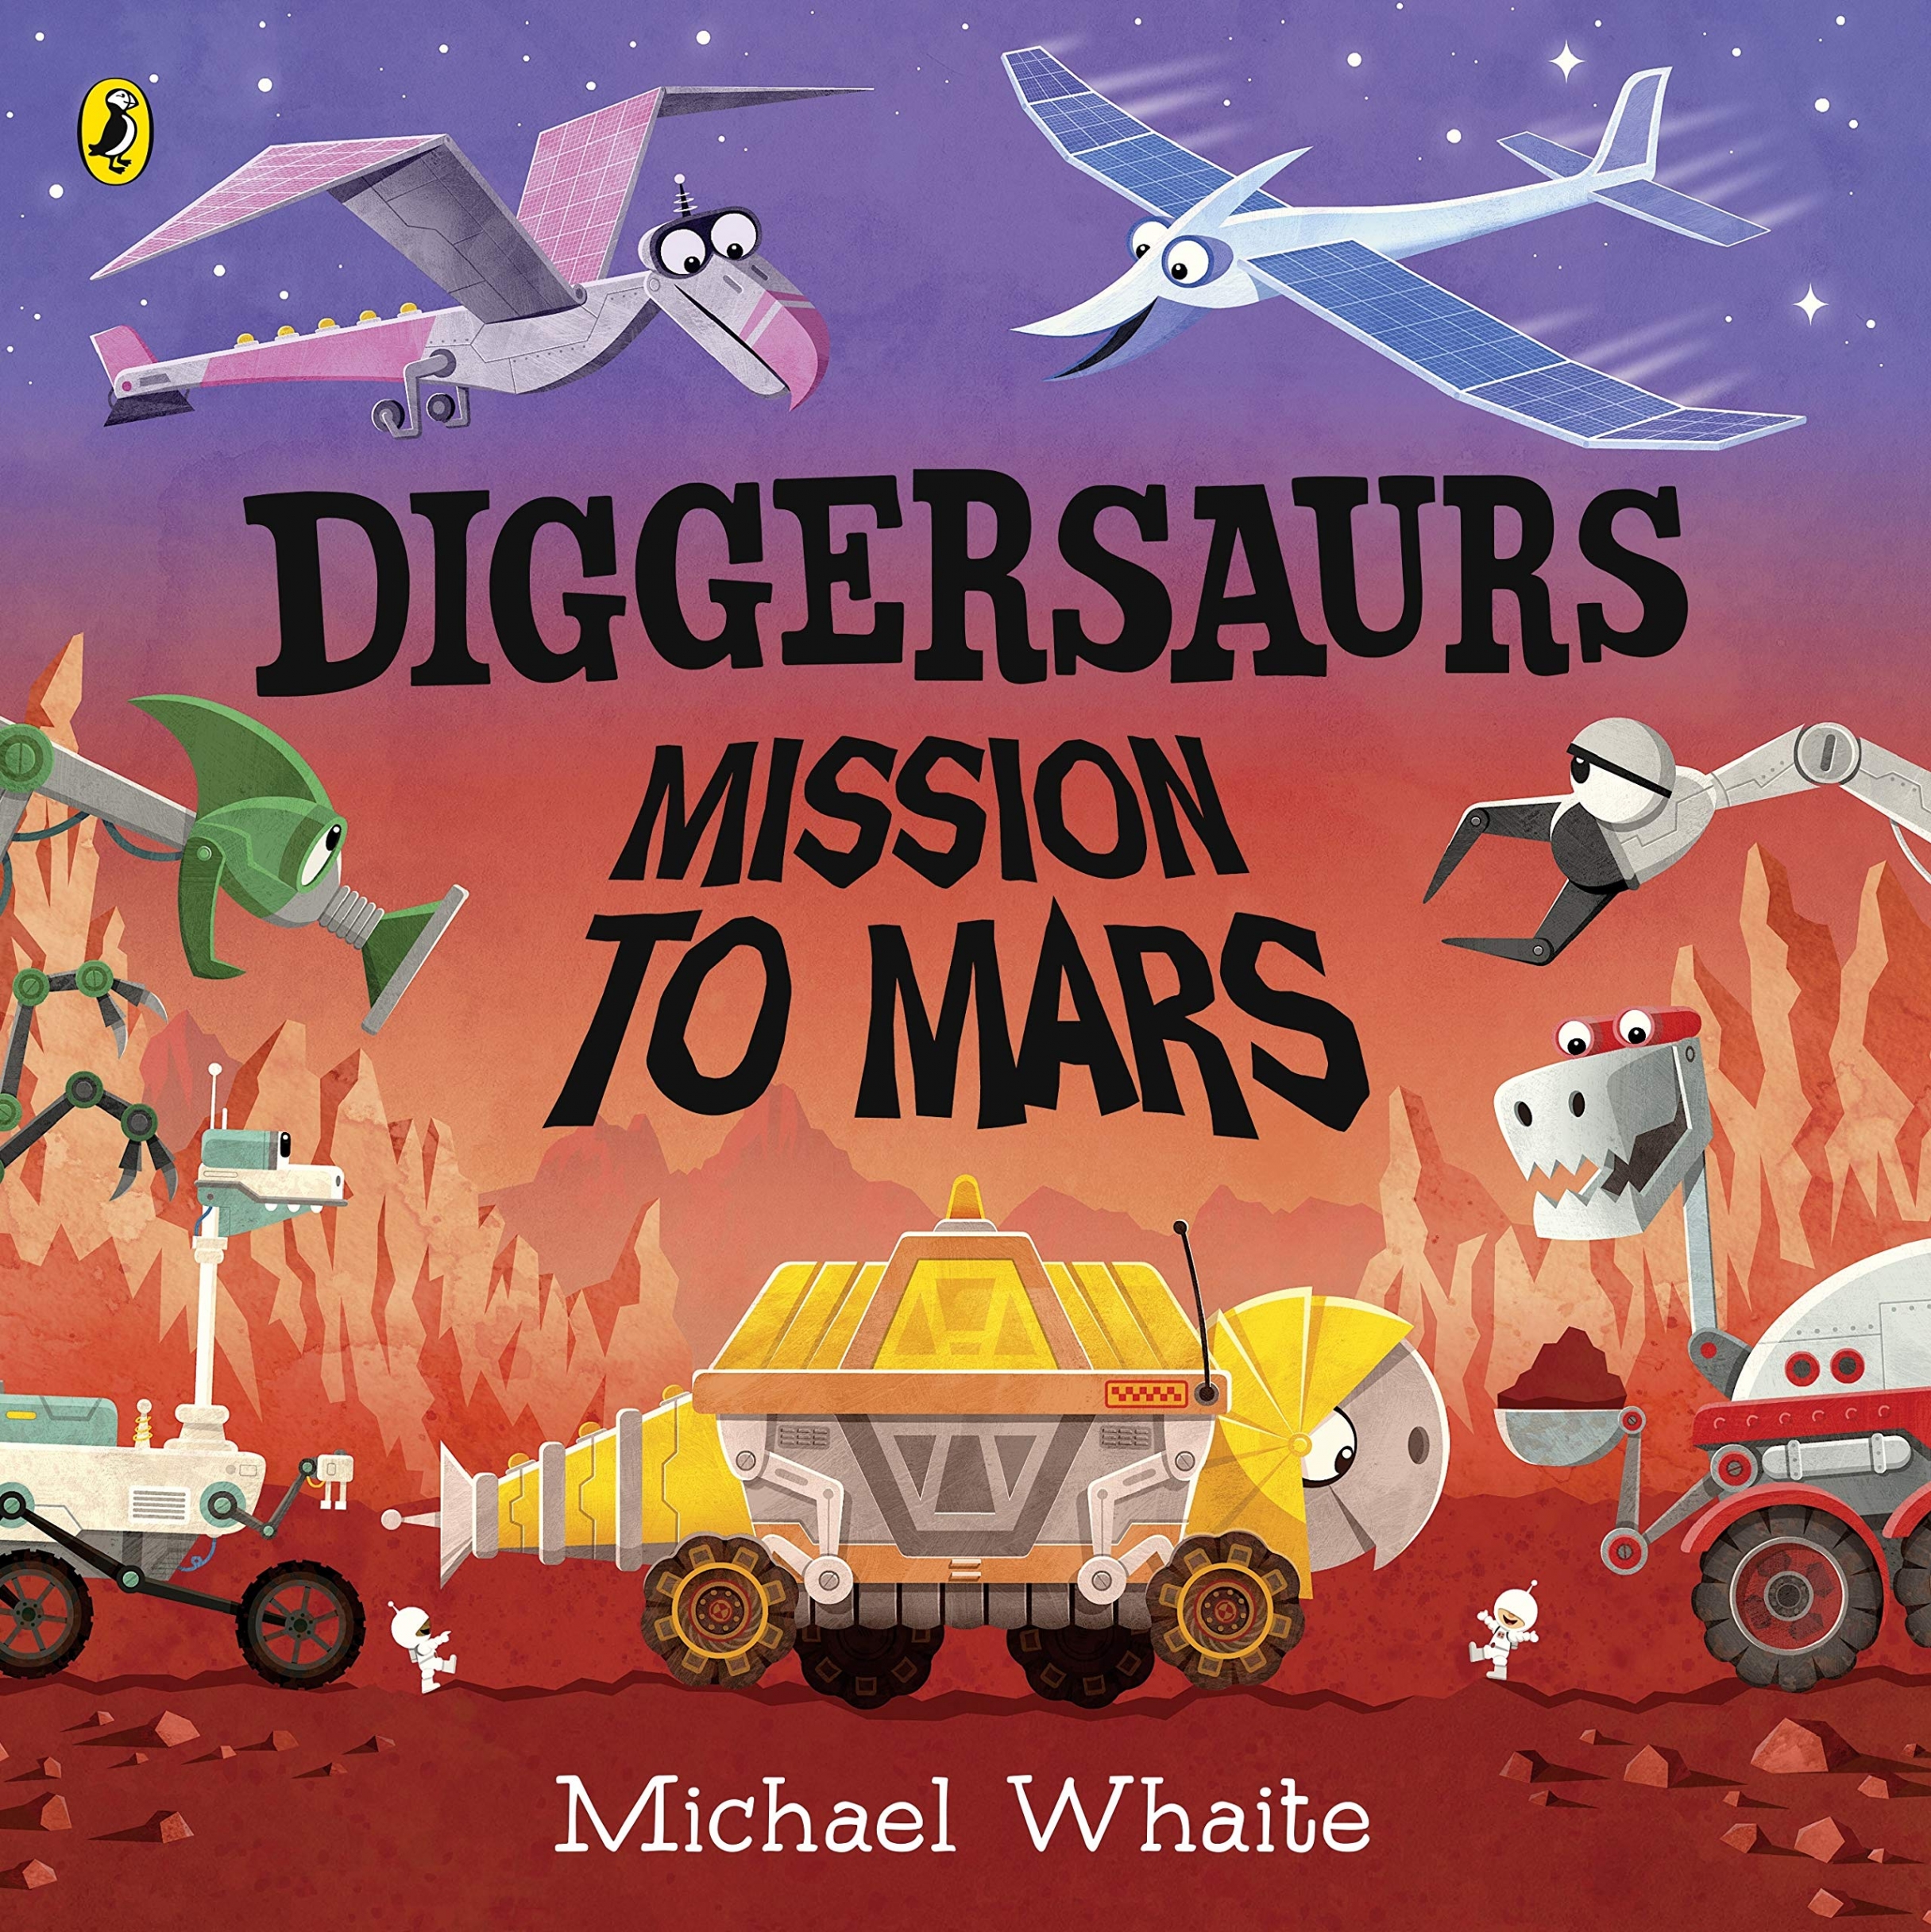 Whaite, Michael Diggersaurs: Mission to Mars 